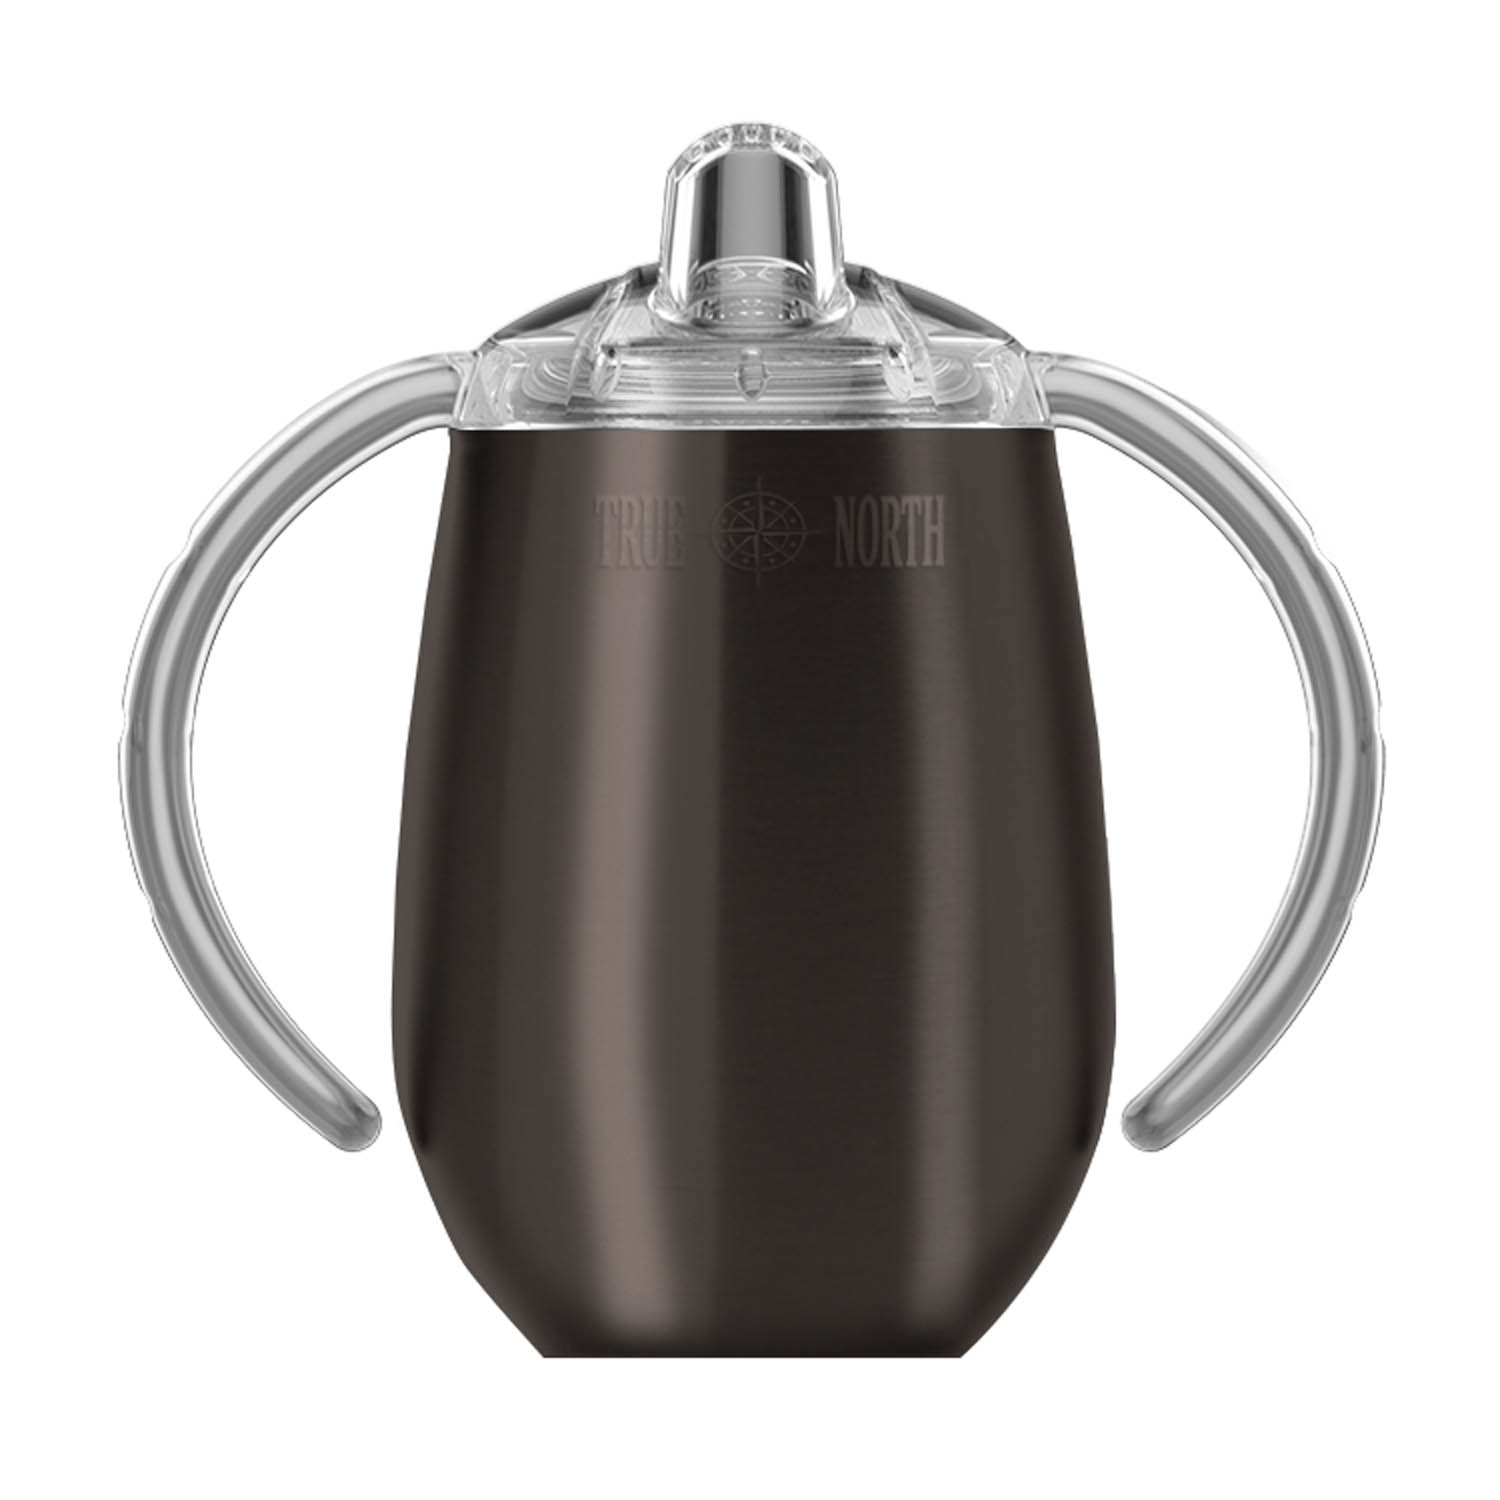 https://media.citylightscollectibles.com/pub/media/catalog/product/rdi/rdi/true-north-02278-jewel-charcoal-sippy-cup_1.jpg?width=240&height=300&store=default&image-type=small_image